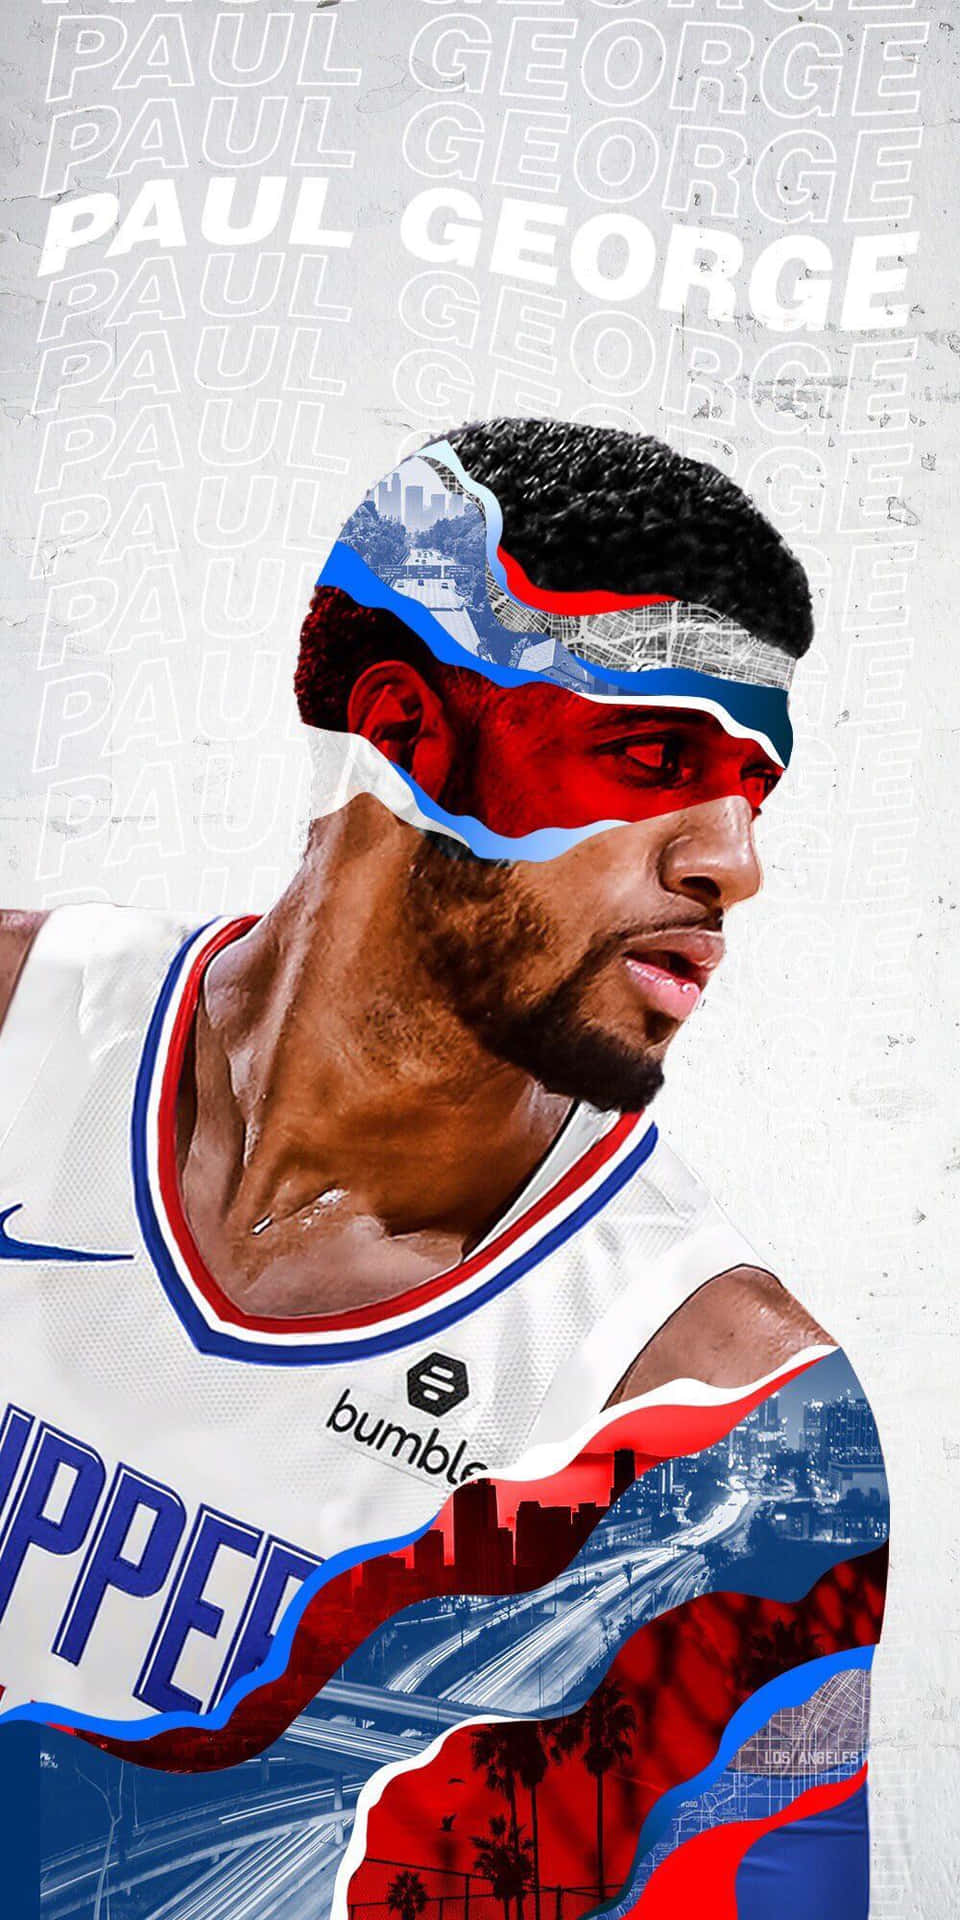 100+] Paul George Clippers Wallpapers